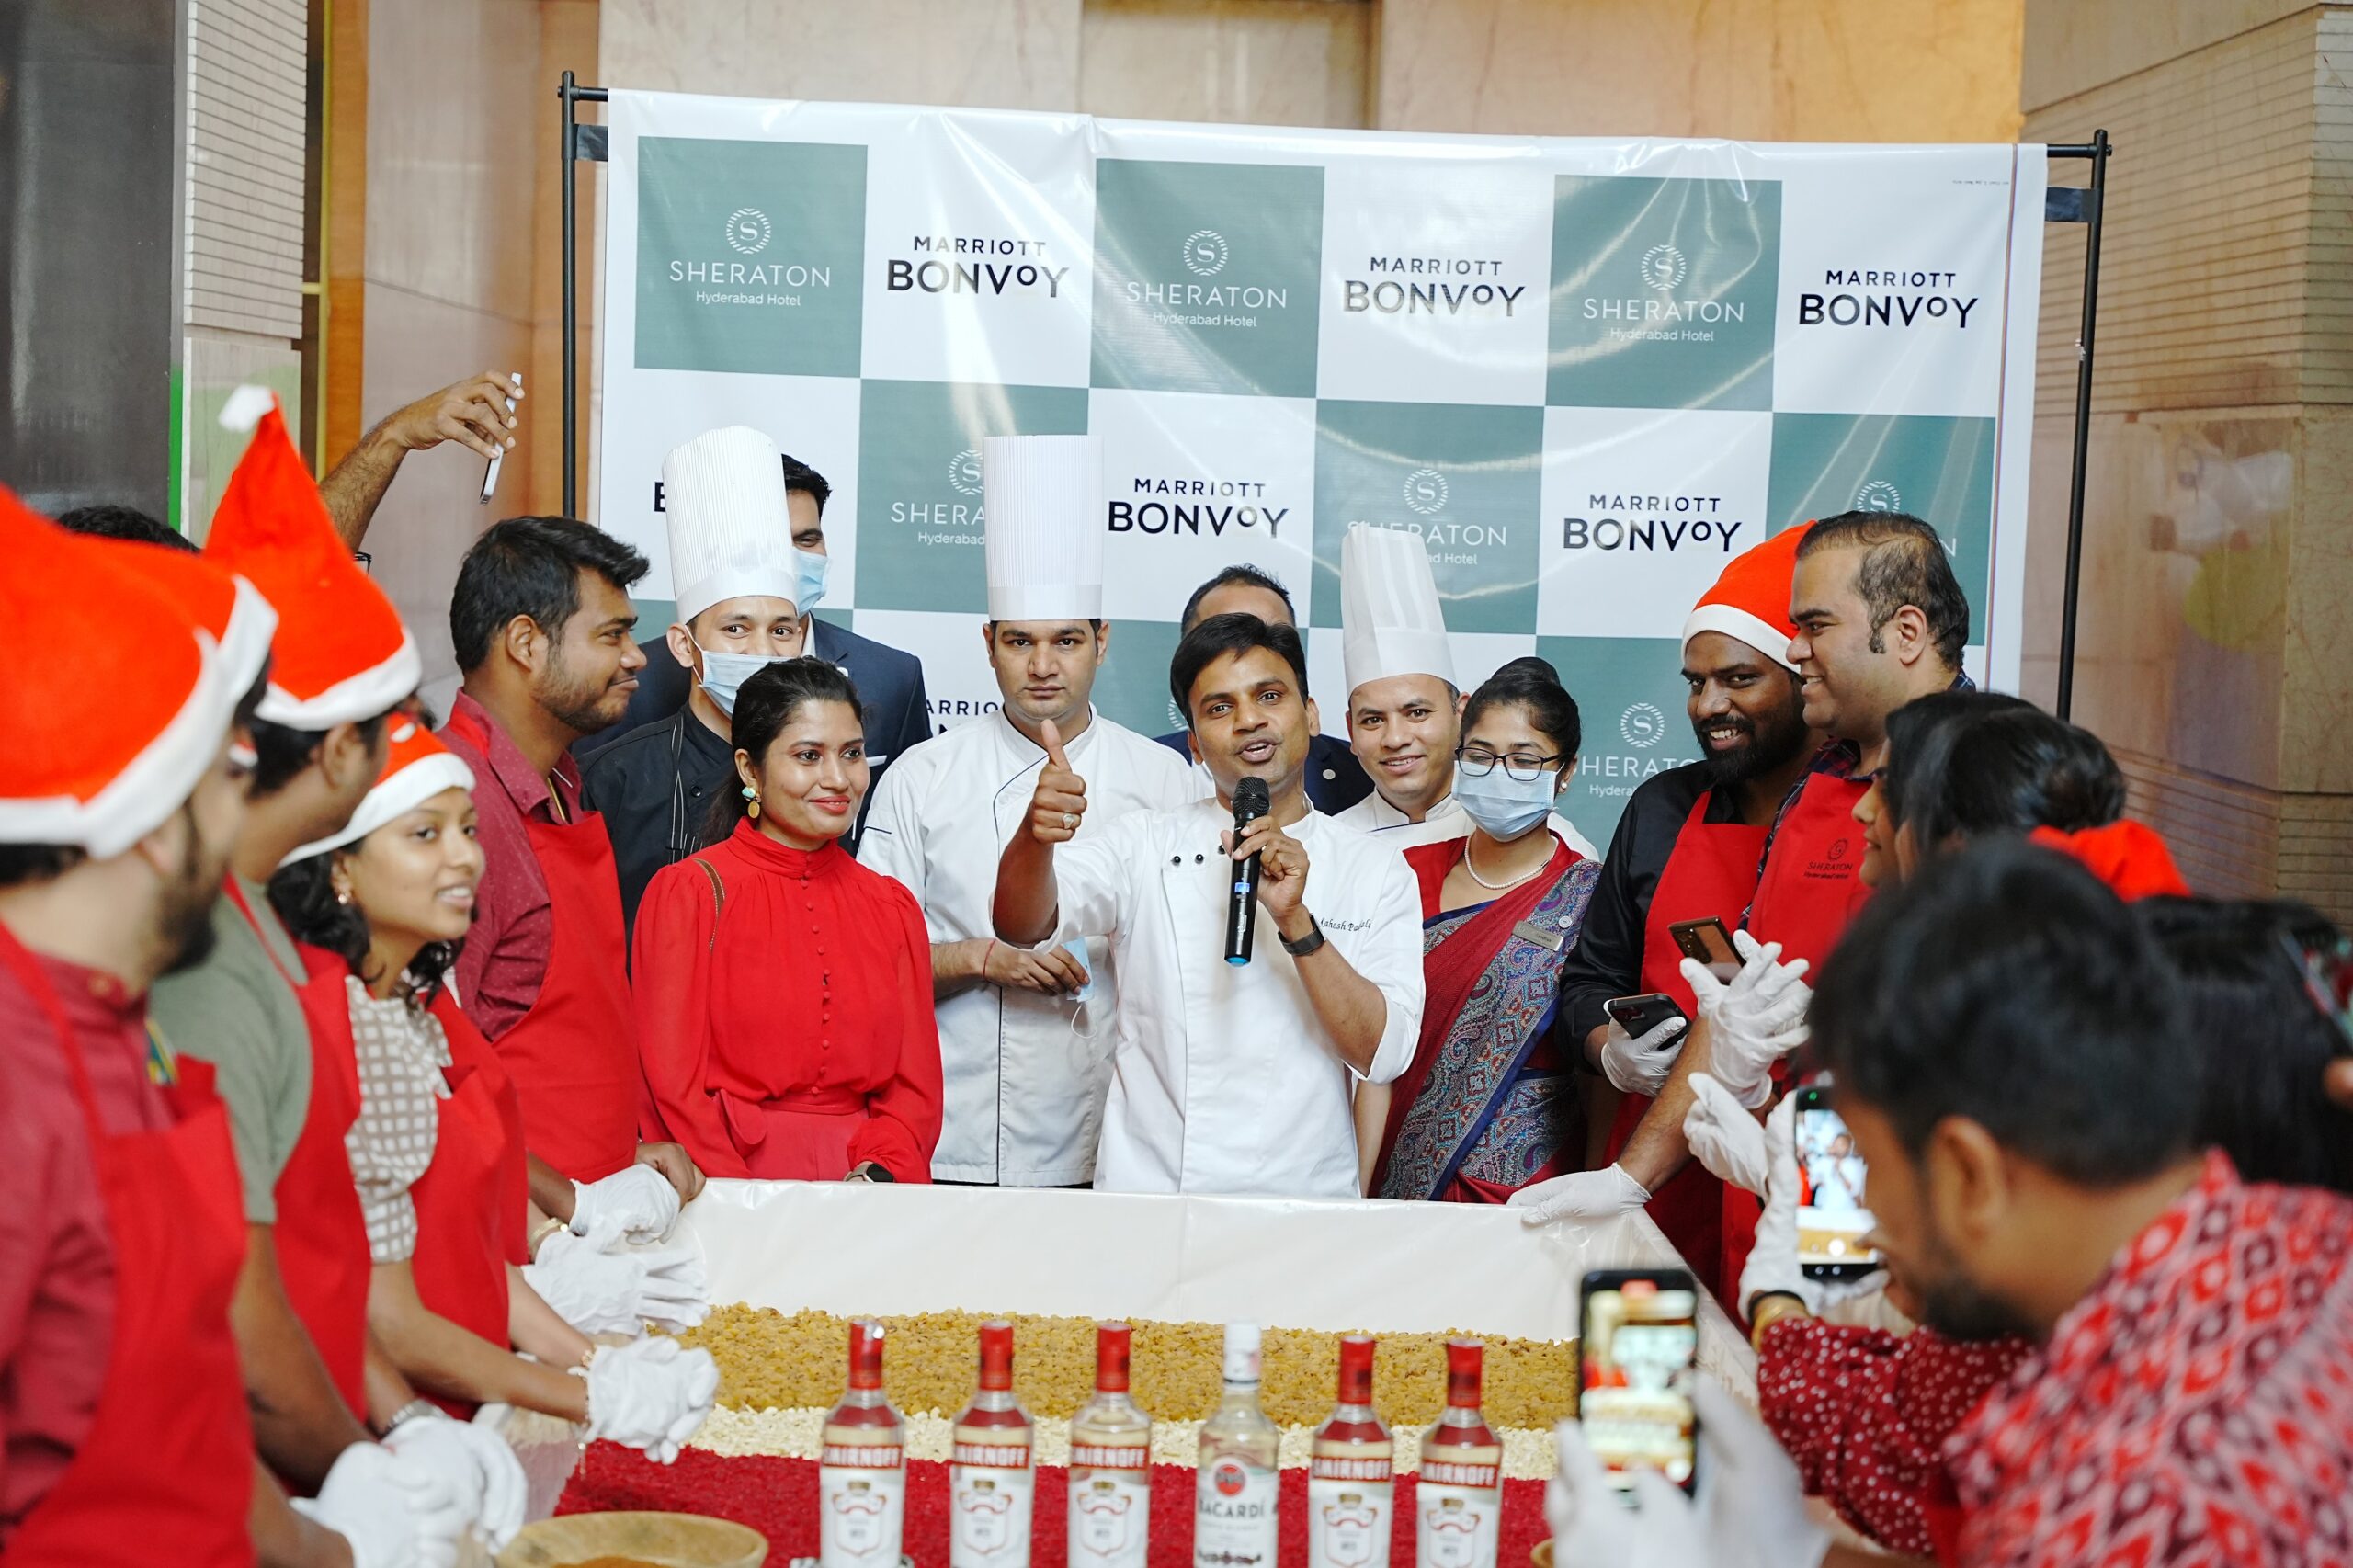 Sheraton Hyderabad Hotel concludes their Annual Cake Mixing Ceremony